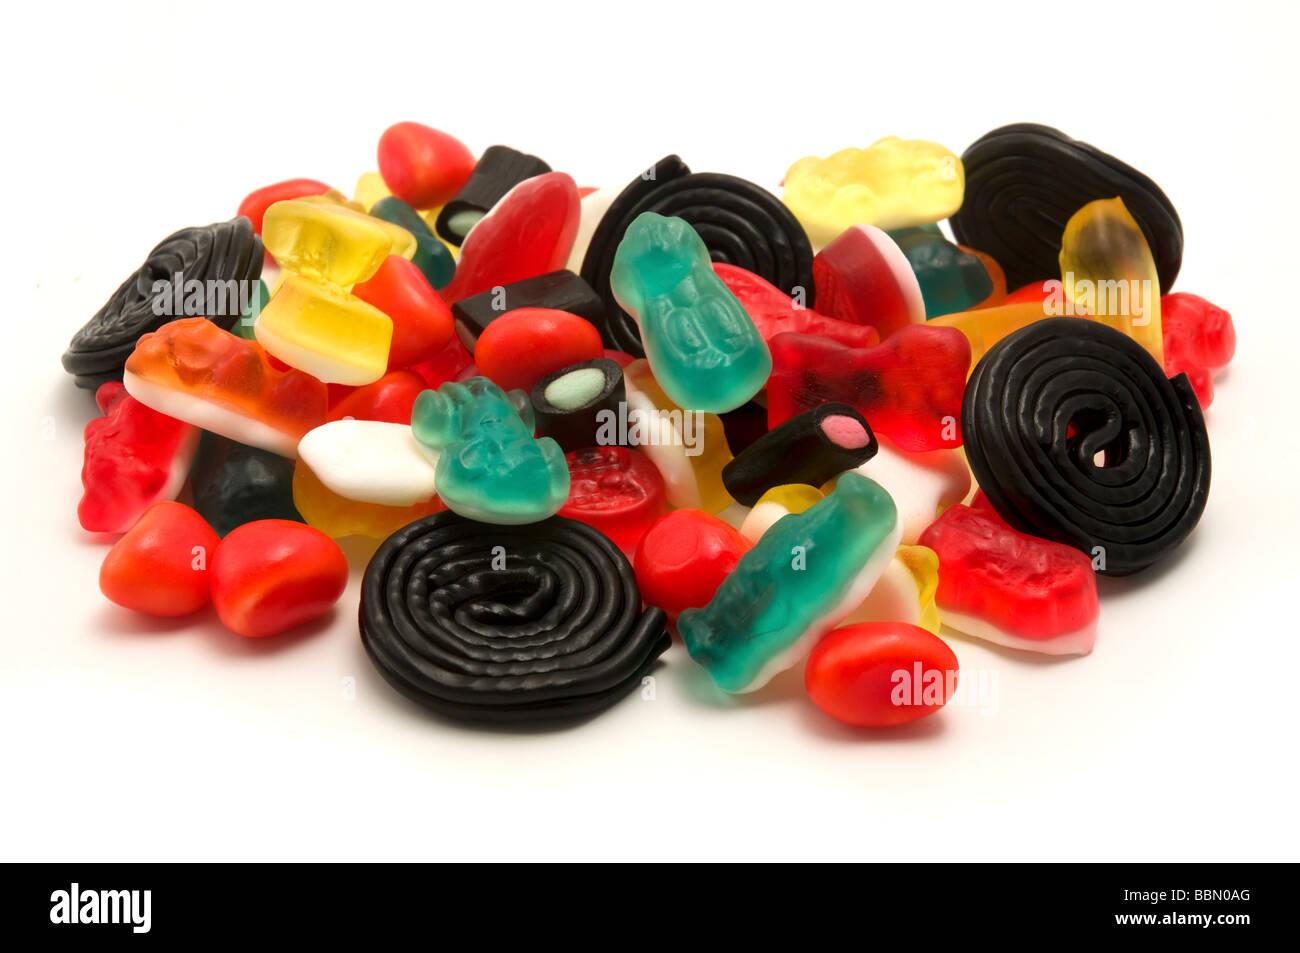 Gummy candies and liquorice on a white background Stock Photo